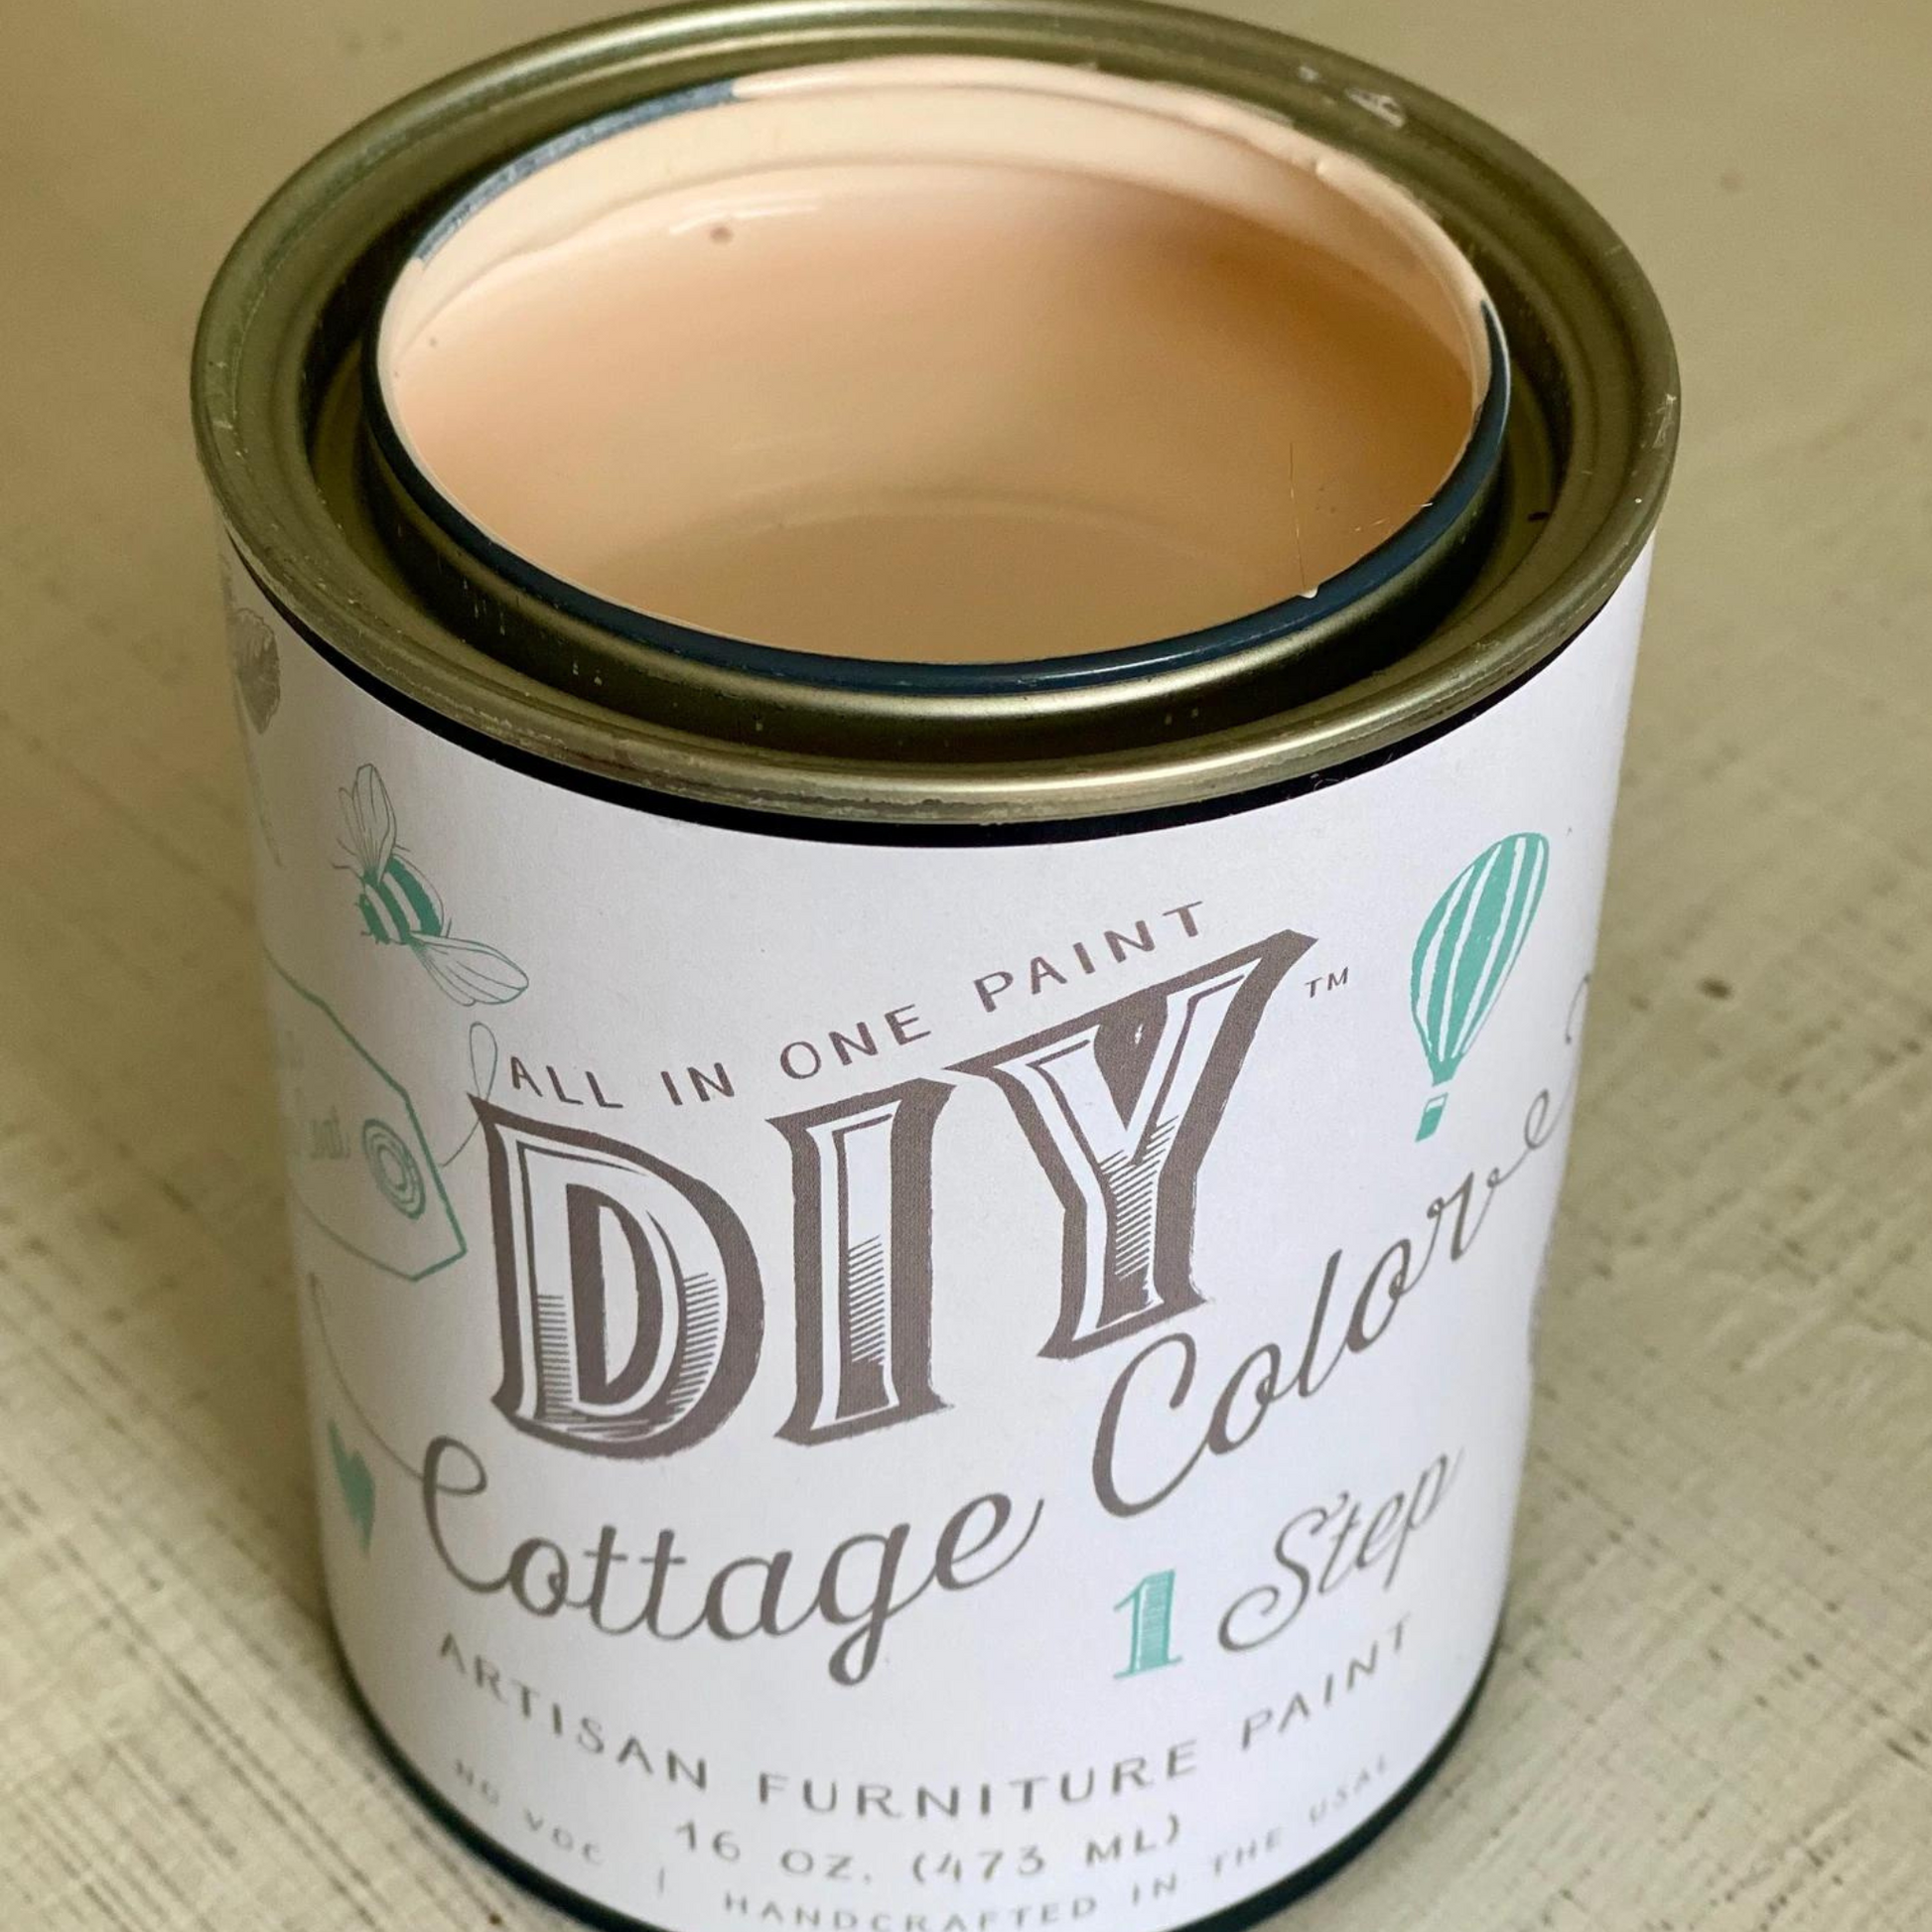 Open can of Vintage Pink - DIY Cottage Color Paint curated by Jamie Ray Vintage. Available in pints at Milton's Daughter.